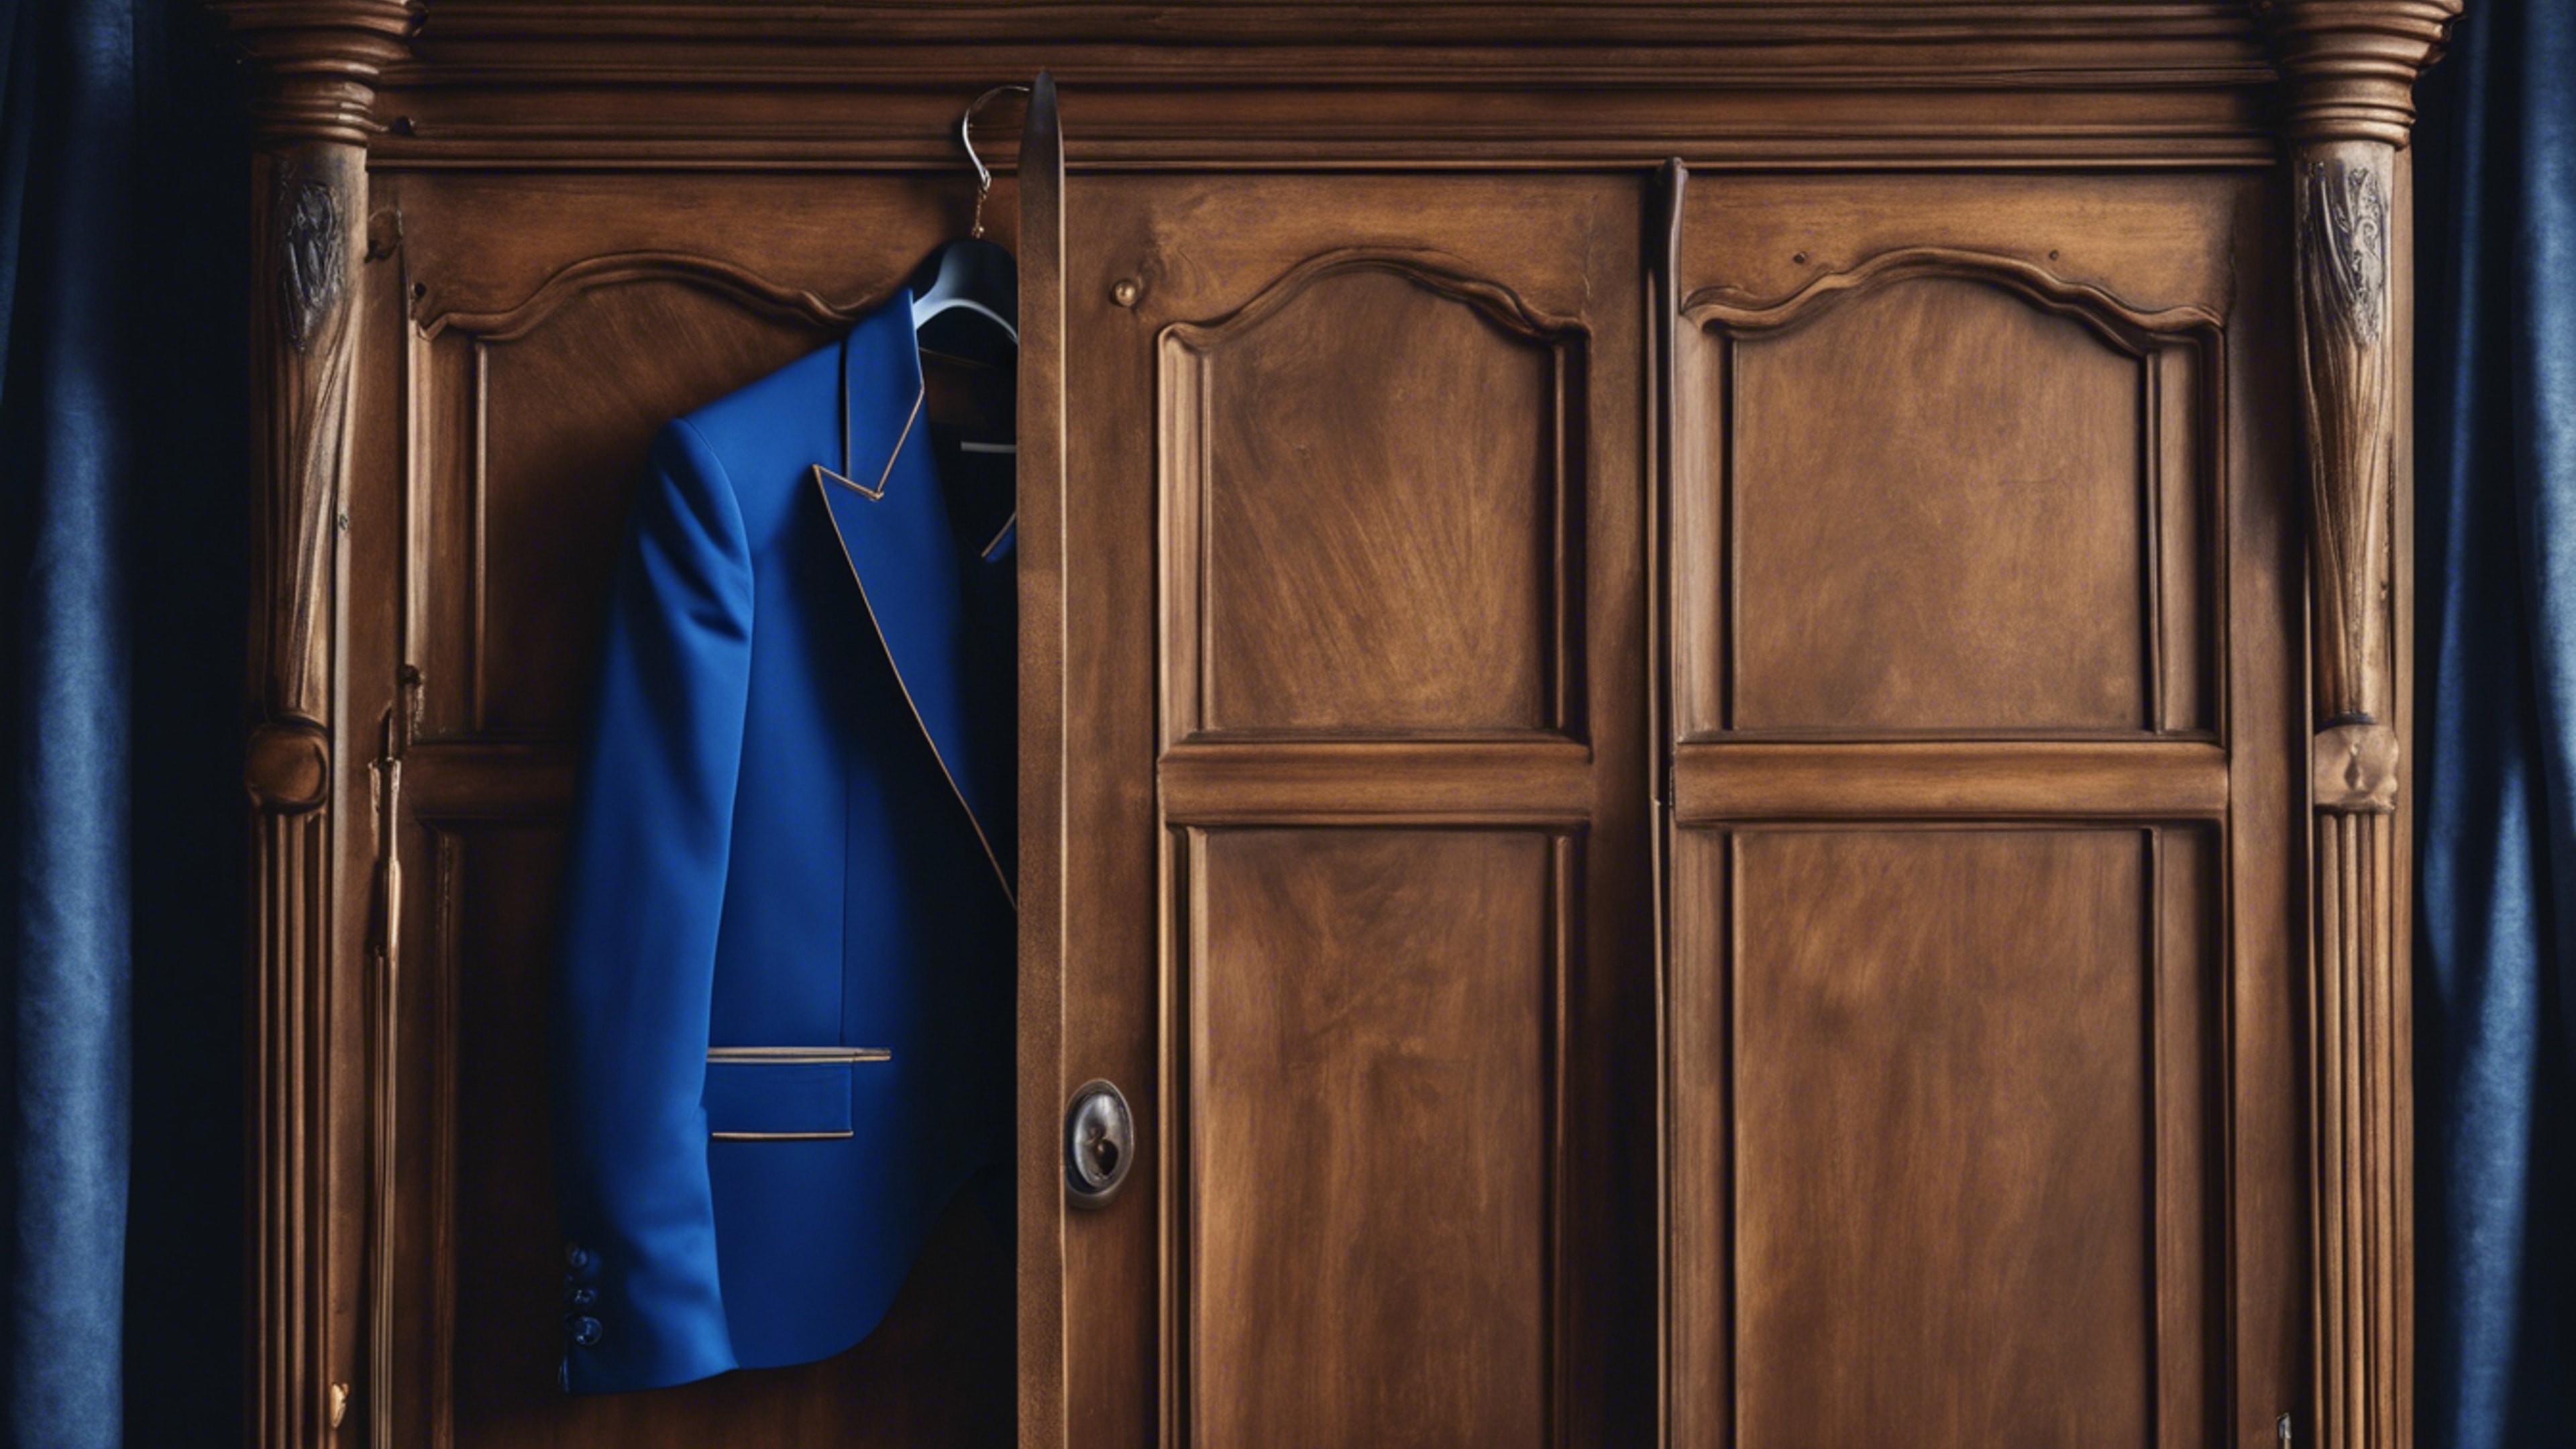 A vintage royal blue tuxedo hanging in a classic antique wardrobe. Wallpaper[1e18aa866c984257b969]